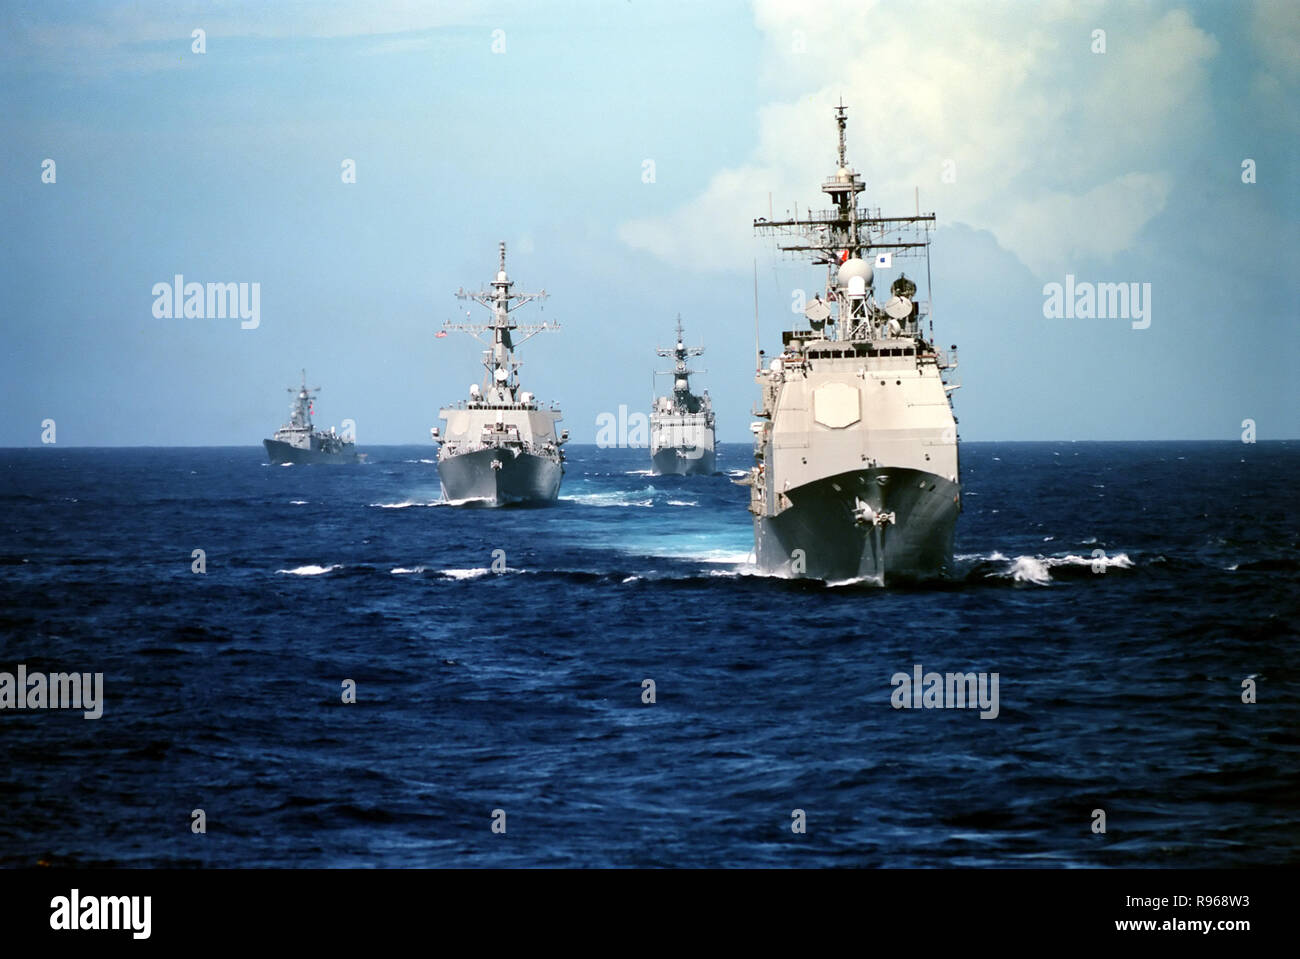 The Ticonderoga Class Guided Missile Cruiser USS Vincennes (CG 49) (right) steams in front of three other classes of U.S. Navy ships. Following the Vincennes from right to left are the Spruance Class Destroyer USS John Cushing (DD 985), Arleigh Burke Class Guided Missile Destroyer USS John S. McCain (DDG 56), and the Oliver Hazard Perry class Guided Missile Frigate USS Gary (FFG 51).   DoD photo by Petty Officer 1st Class Wade McKinnon, U.S. Navy Stock Photo